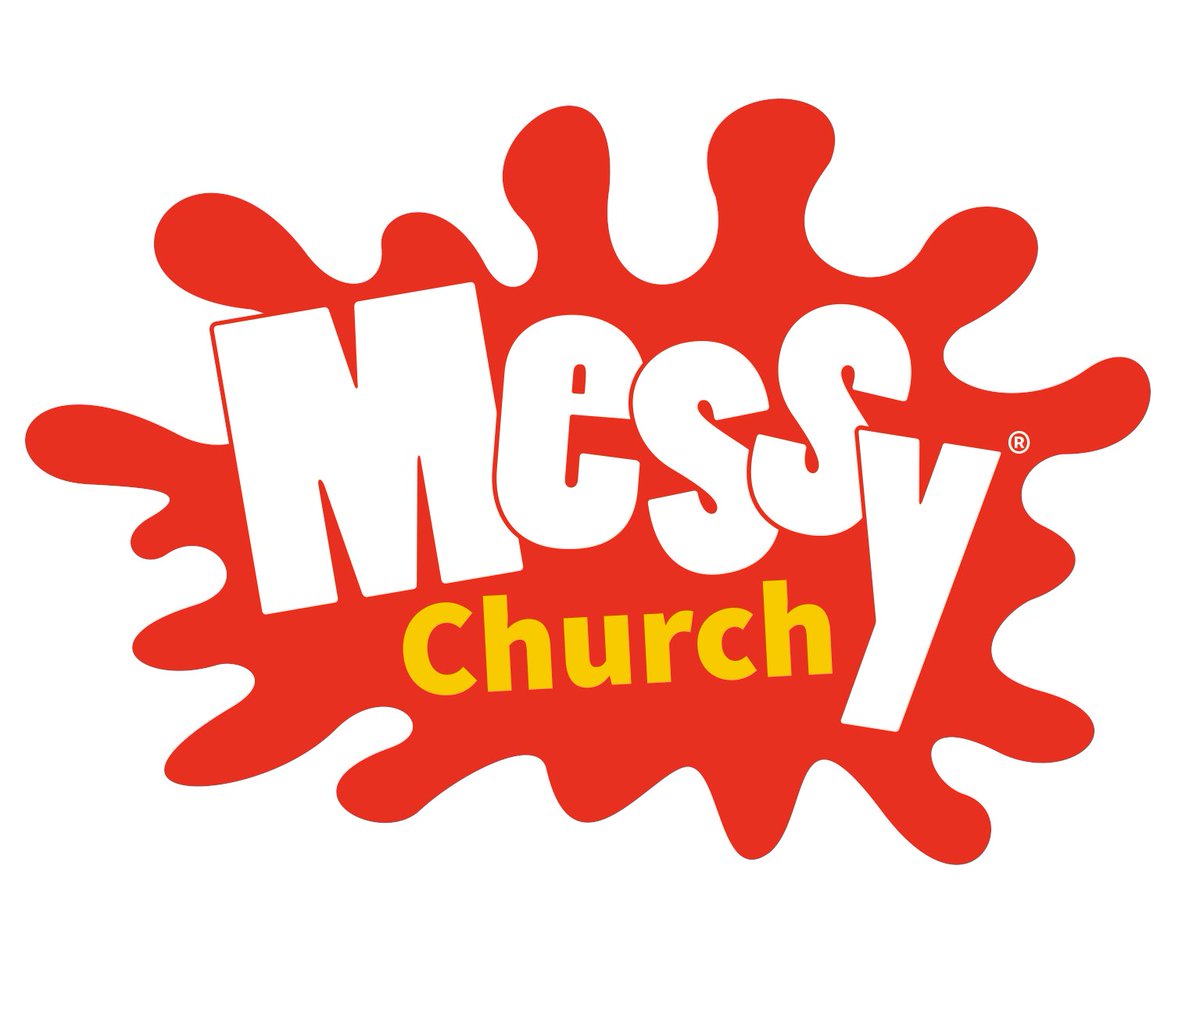 🖌️Messy Church this Sunday from 3.45pm🖌️ In a relaxed & welcoming environment, we enjoy crafts, stories, music, science activities, share refreshments, and are reminded of the unconditional love of God. We welcome everyone of all ages. Just turn up! #EastDulwich #Peckham